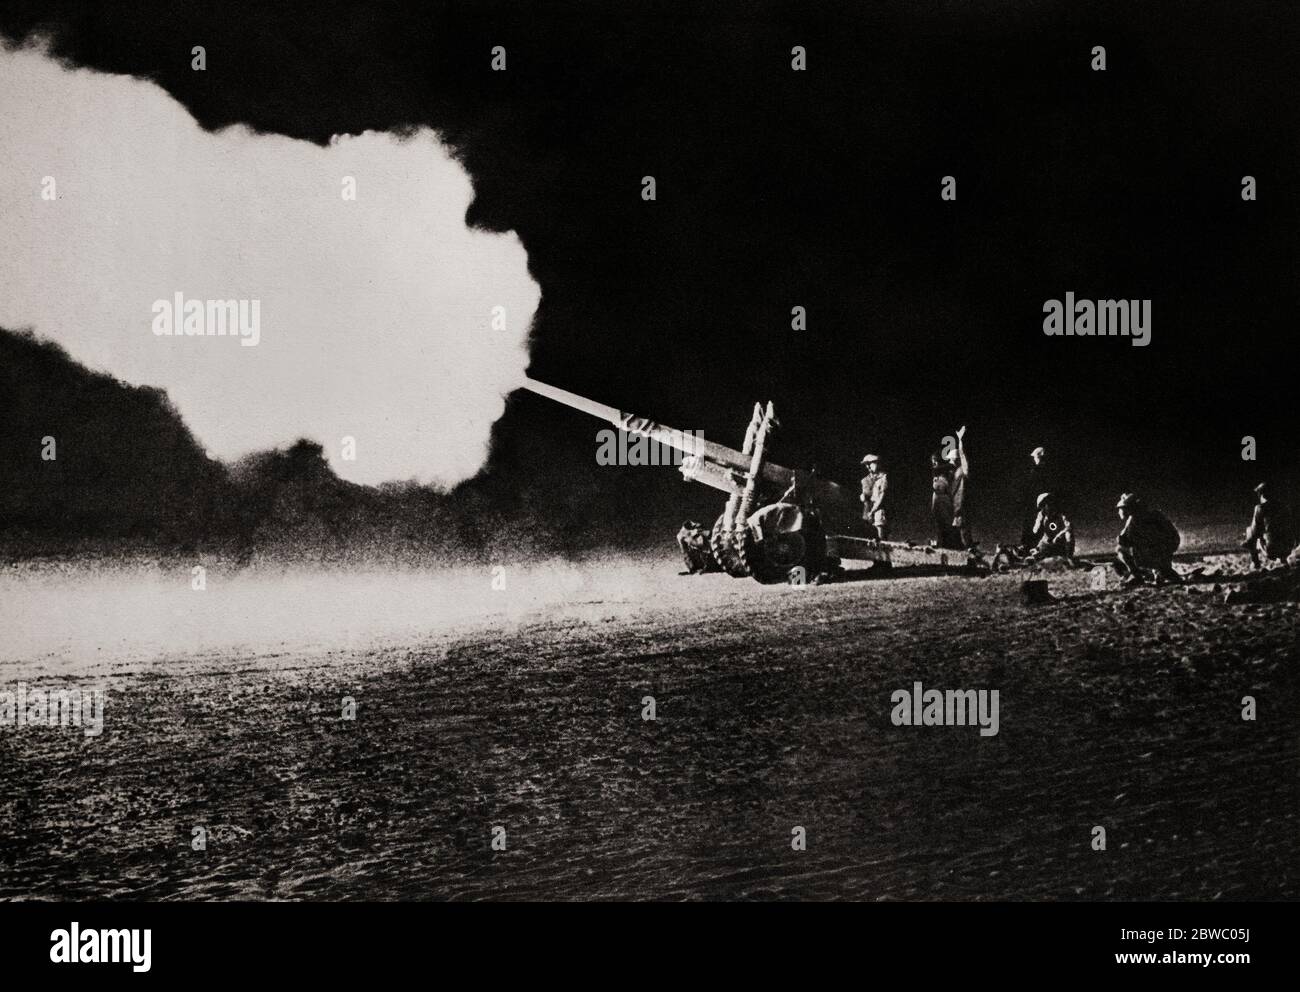 The 4.5 inch field gun bombarding enemy (German) tanks during the Second Battle of El Alamein (23 October – 11 November 1942) which prevented the Axis from advancing further into Egypt. It was a good weapon that could fire a 25 kg  shell up to 11.6 miles matching German 10.5 cm and 150 mm howitzers in range and firepower. Stock Photo